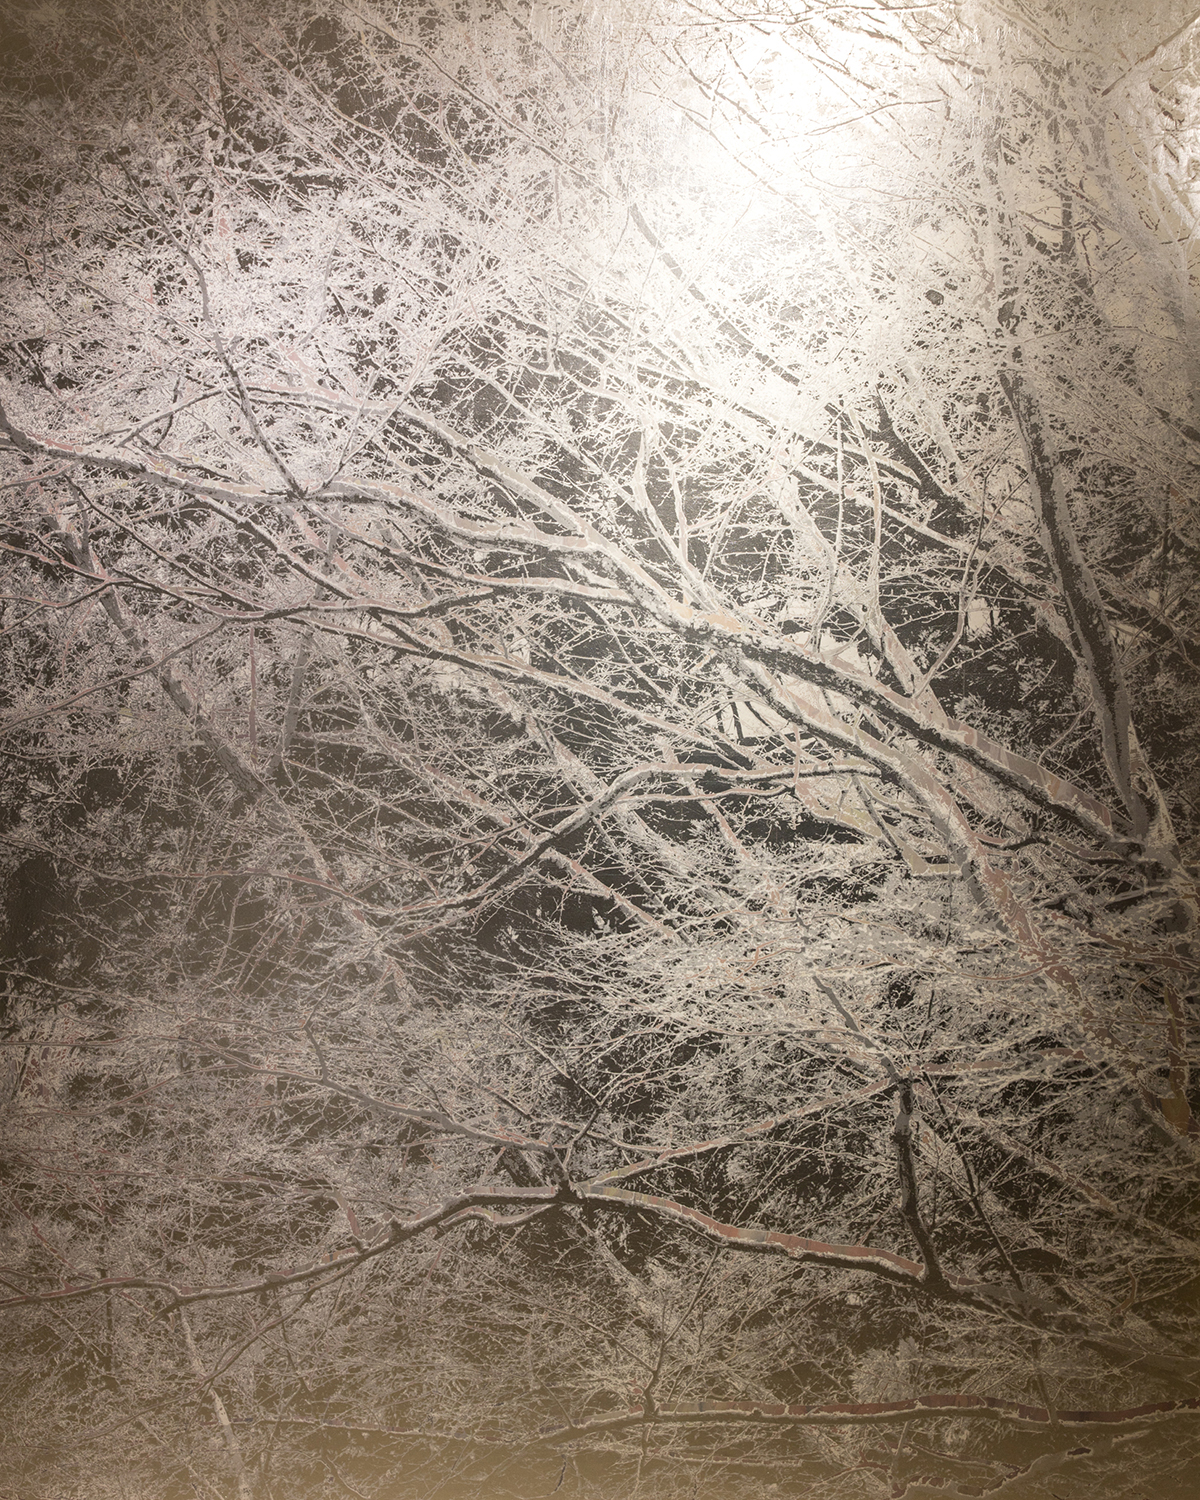 Photograph of snow on trees in street light